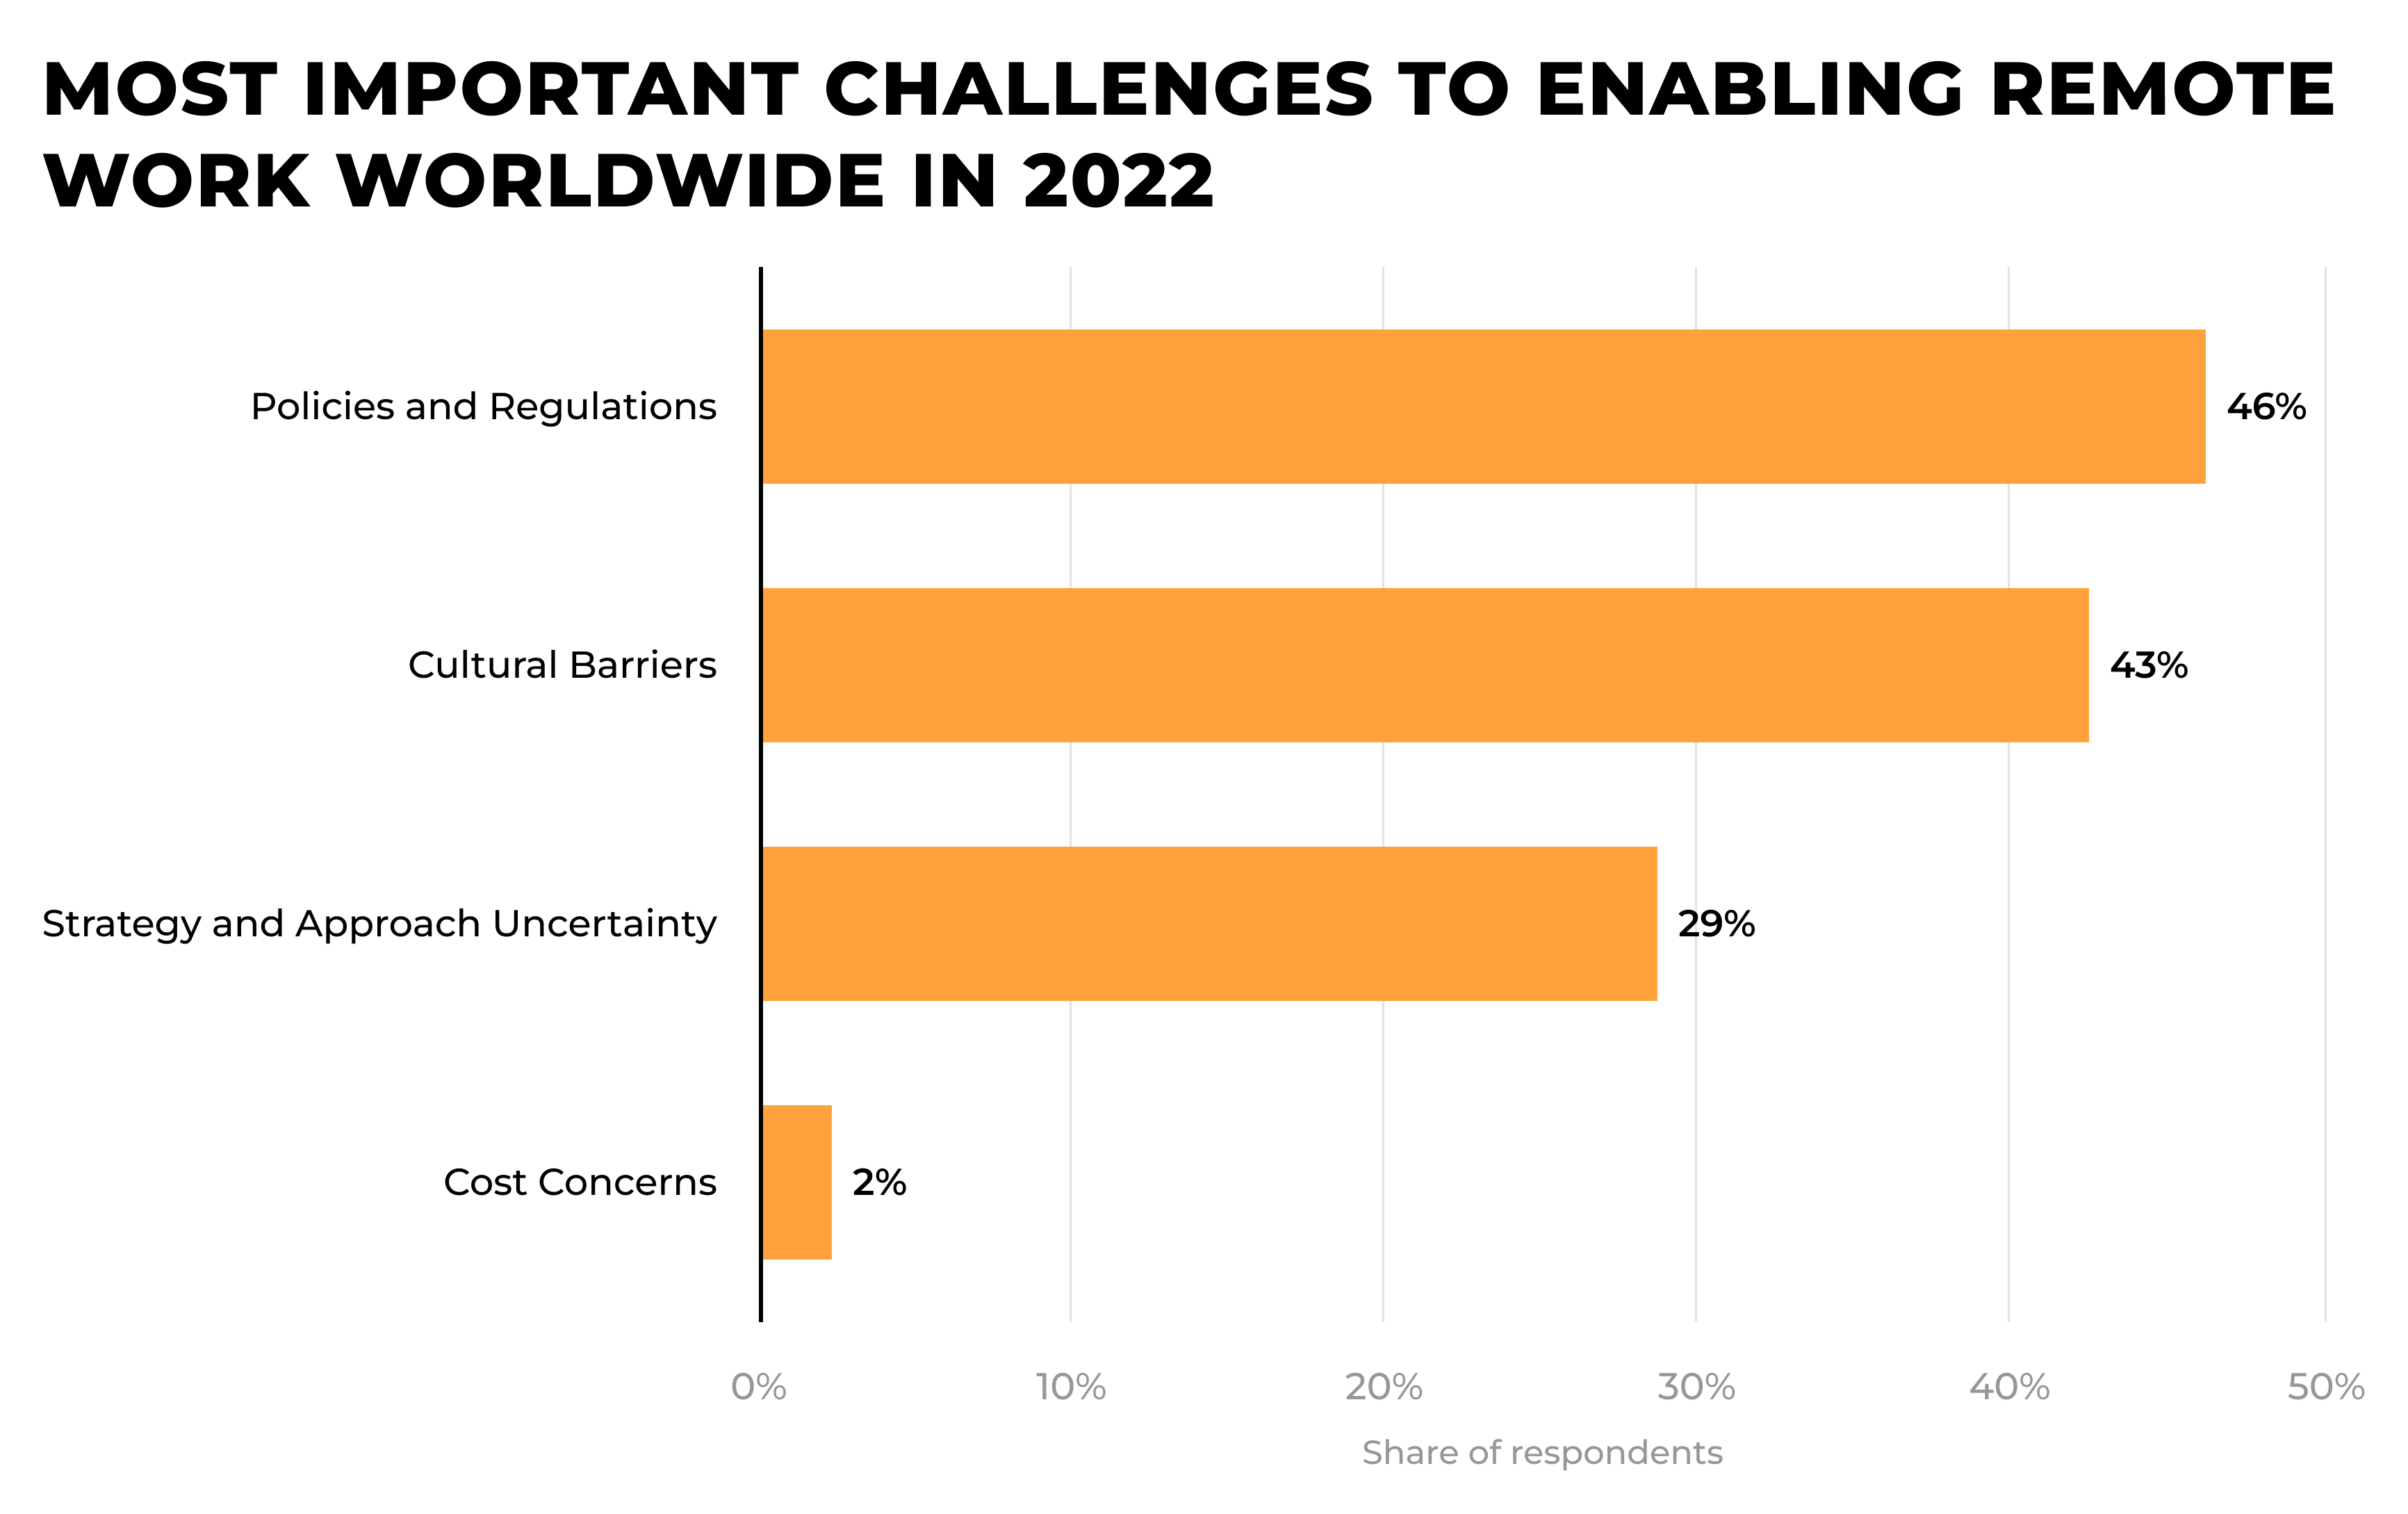 Most important challenges to enabling remote work worldwide in 2022